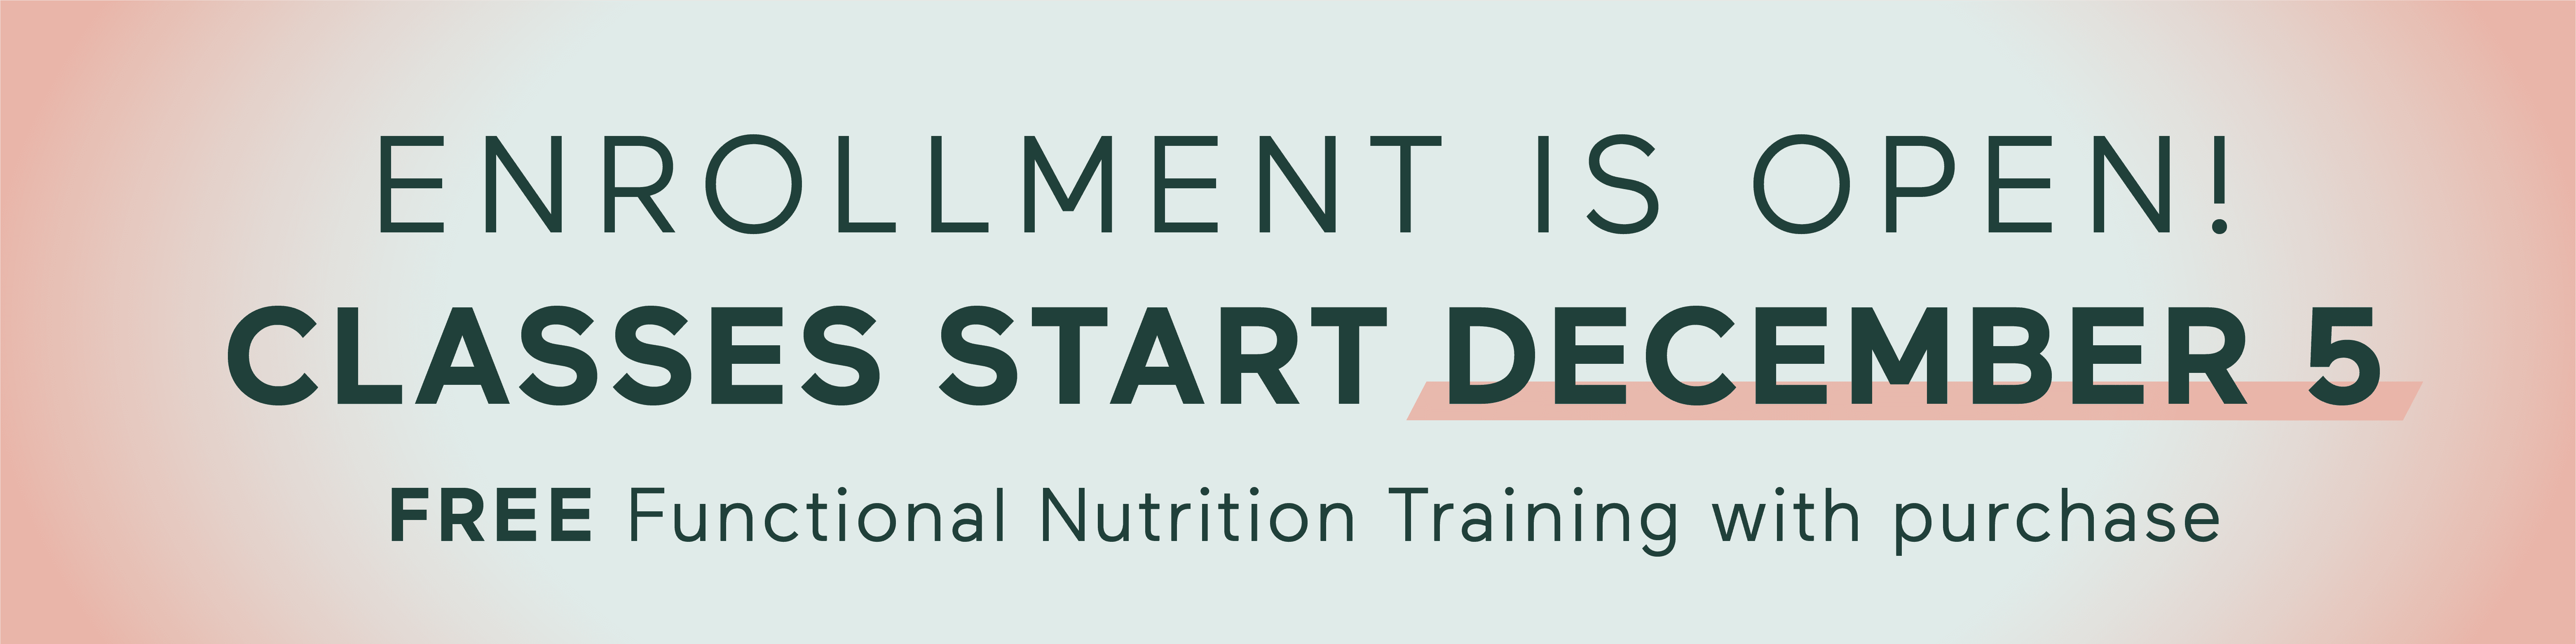 Enrollment is open. Classes start December 5th. Free functional nutrition training free with purchase.